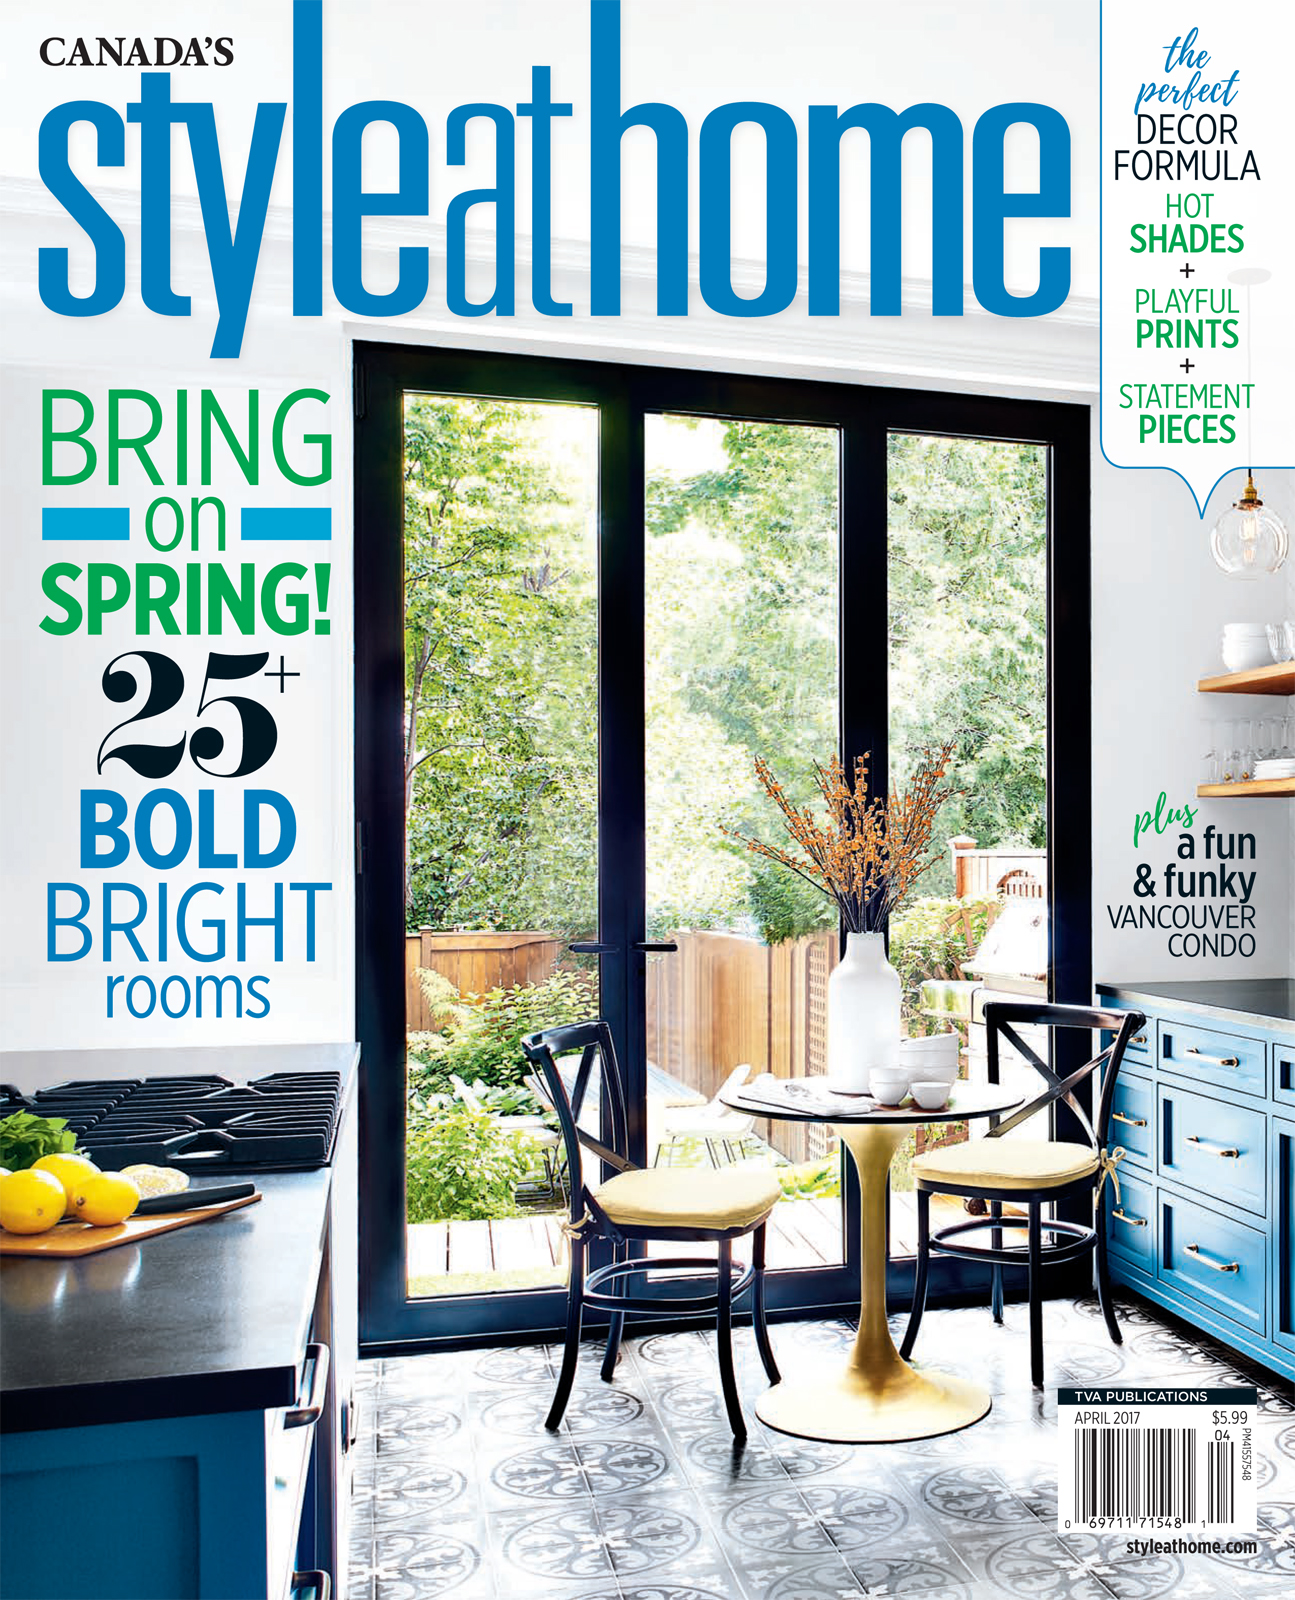 CanadaStyleatHomeApril 2017_Cover.jpg